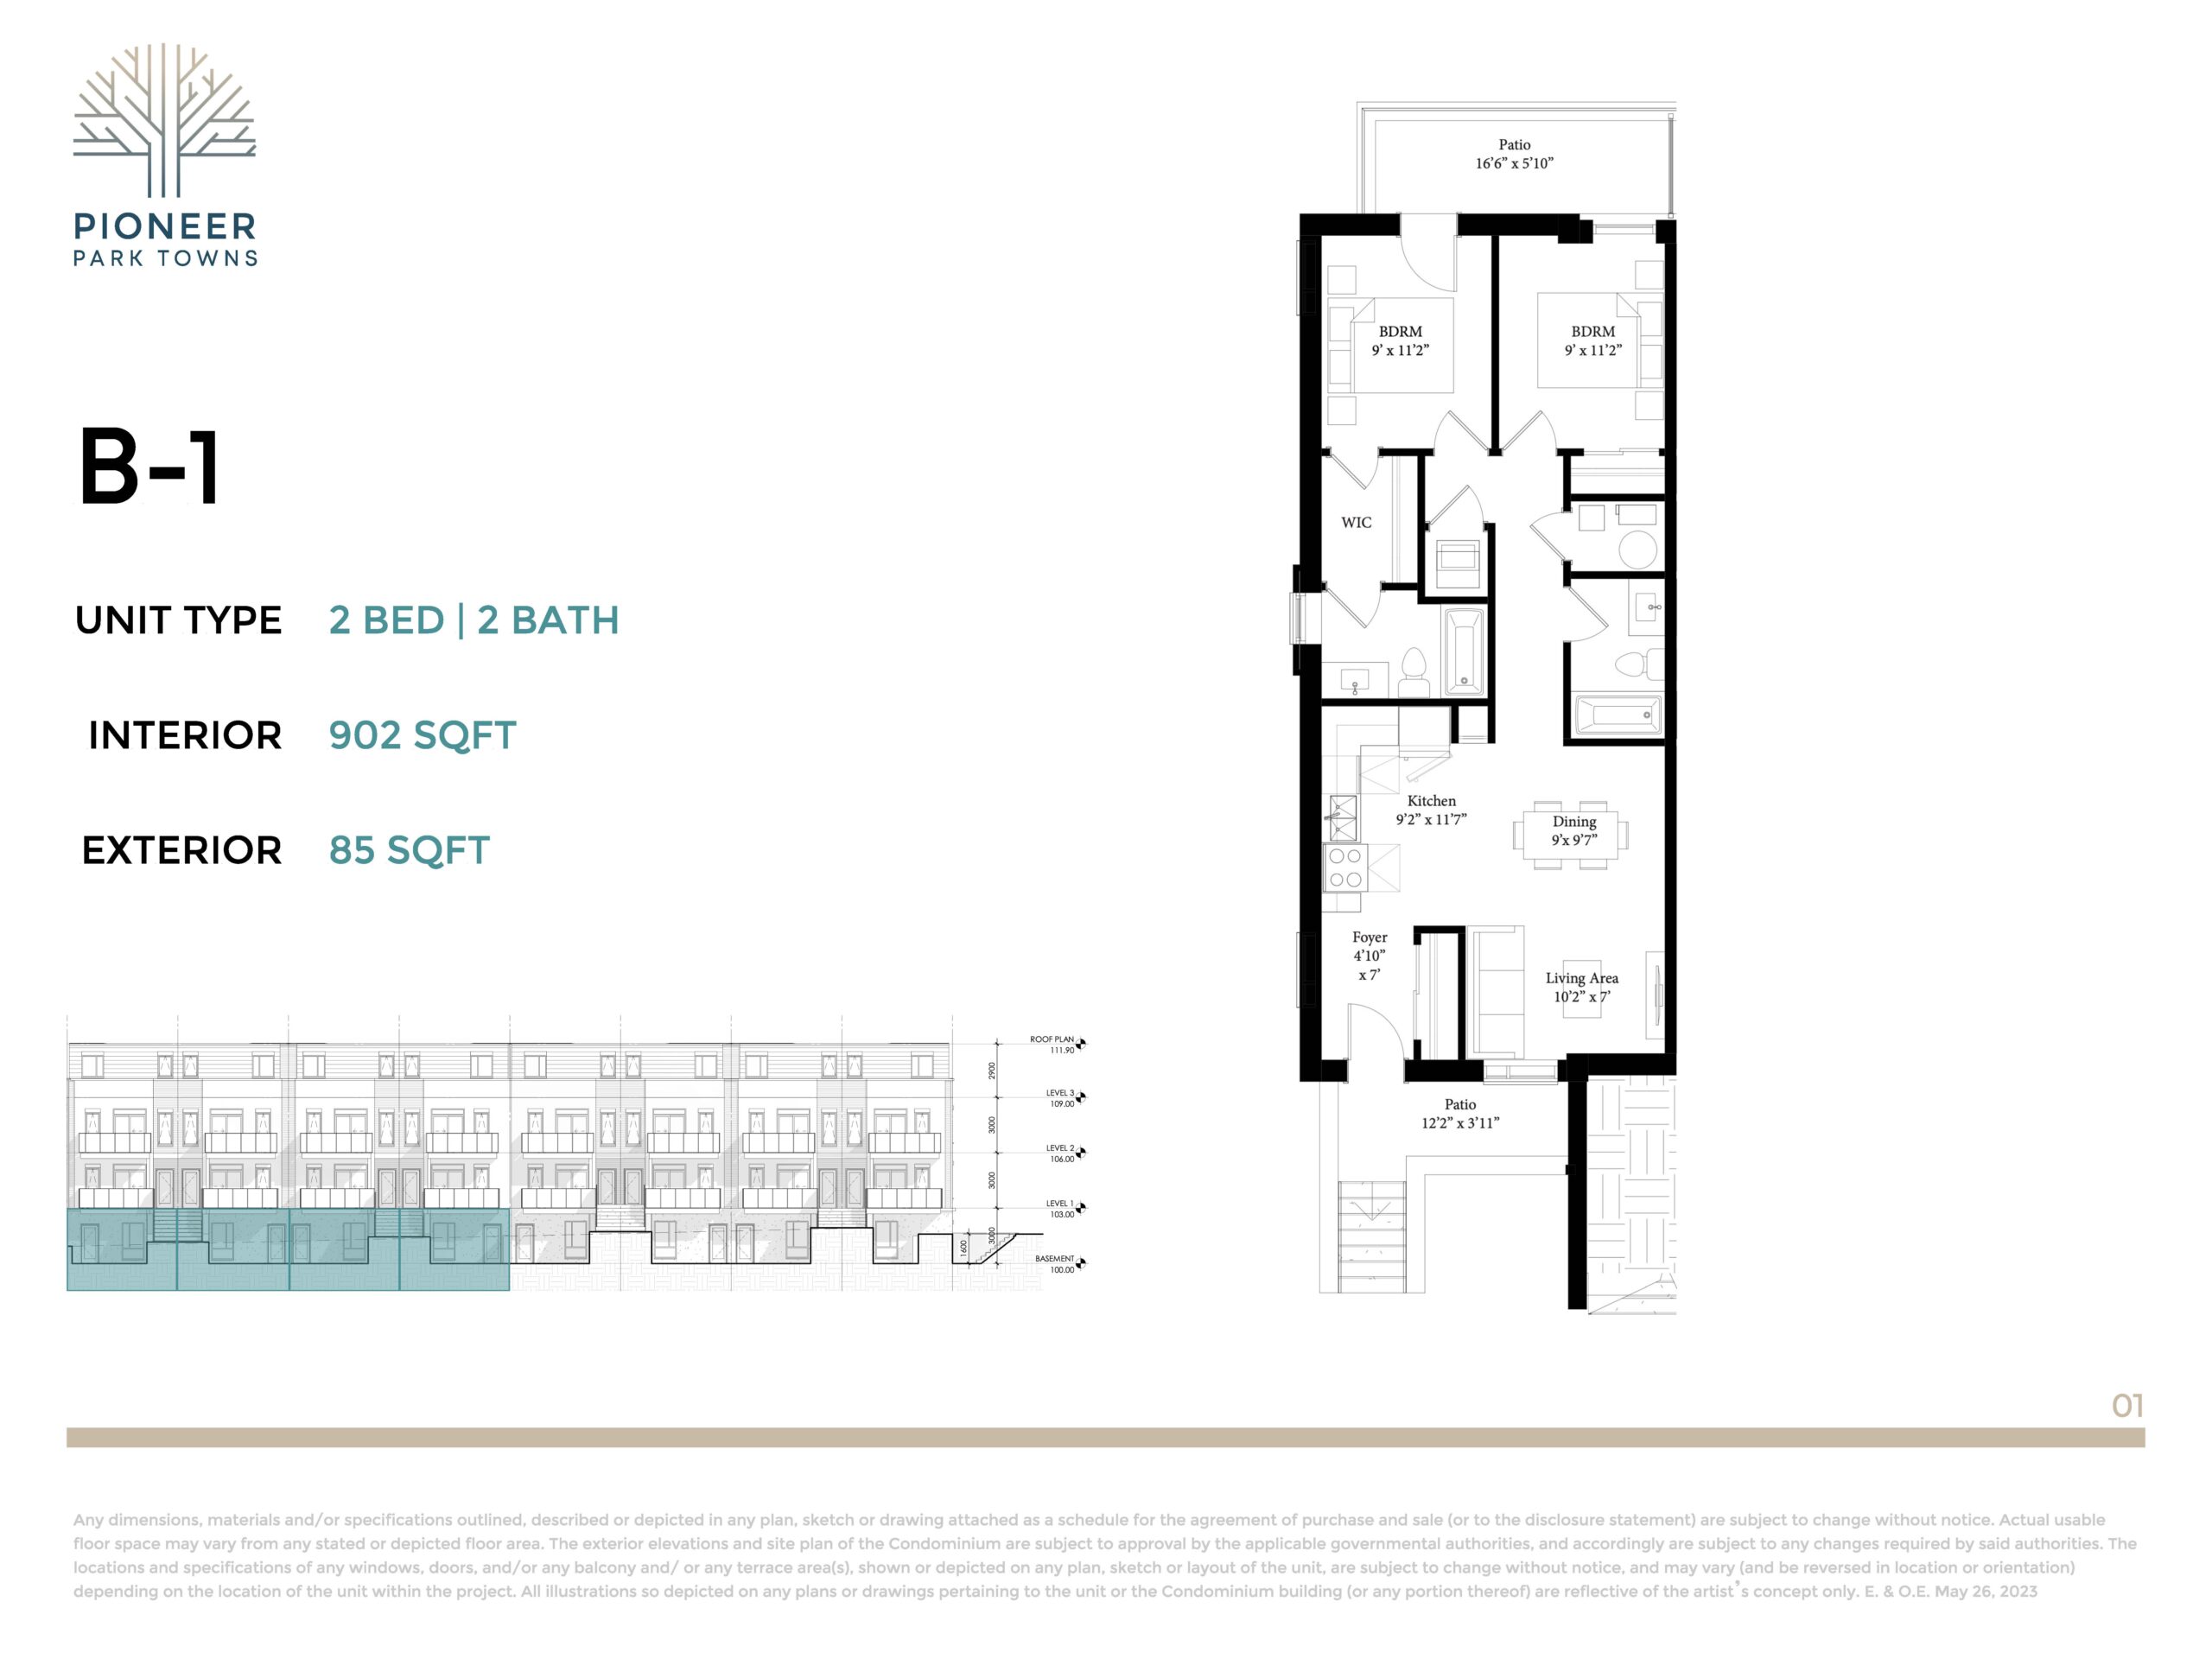  Floor Plan of Pioneer Park Towns with undefined beds